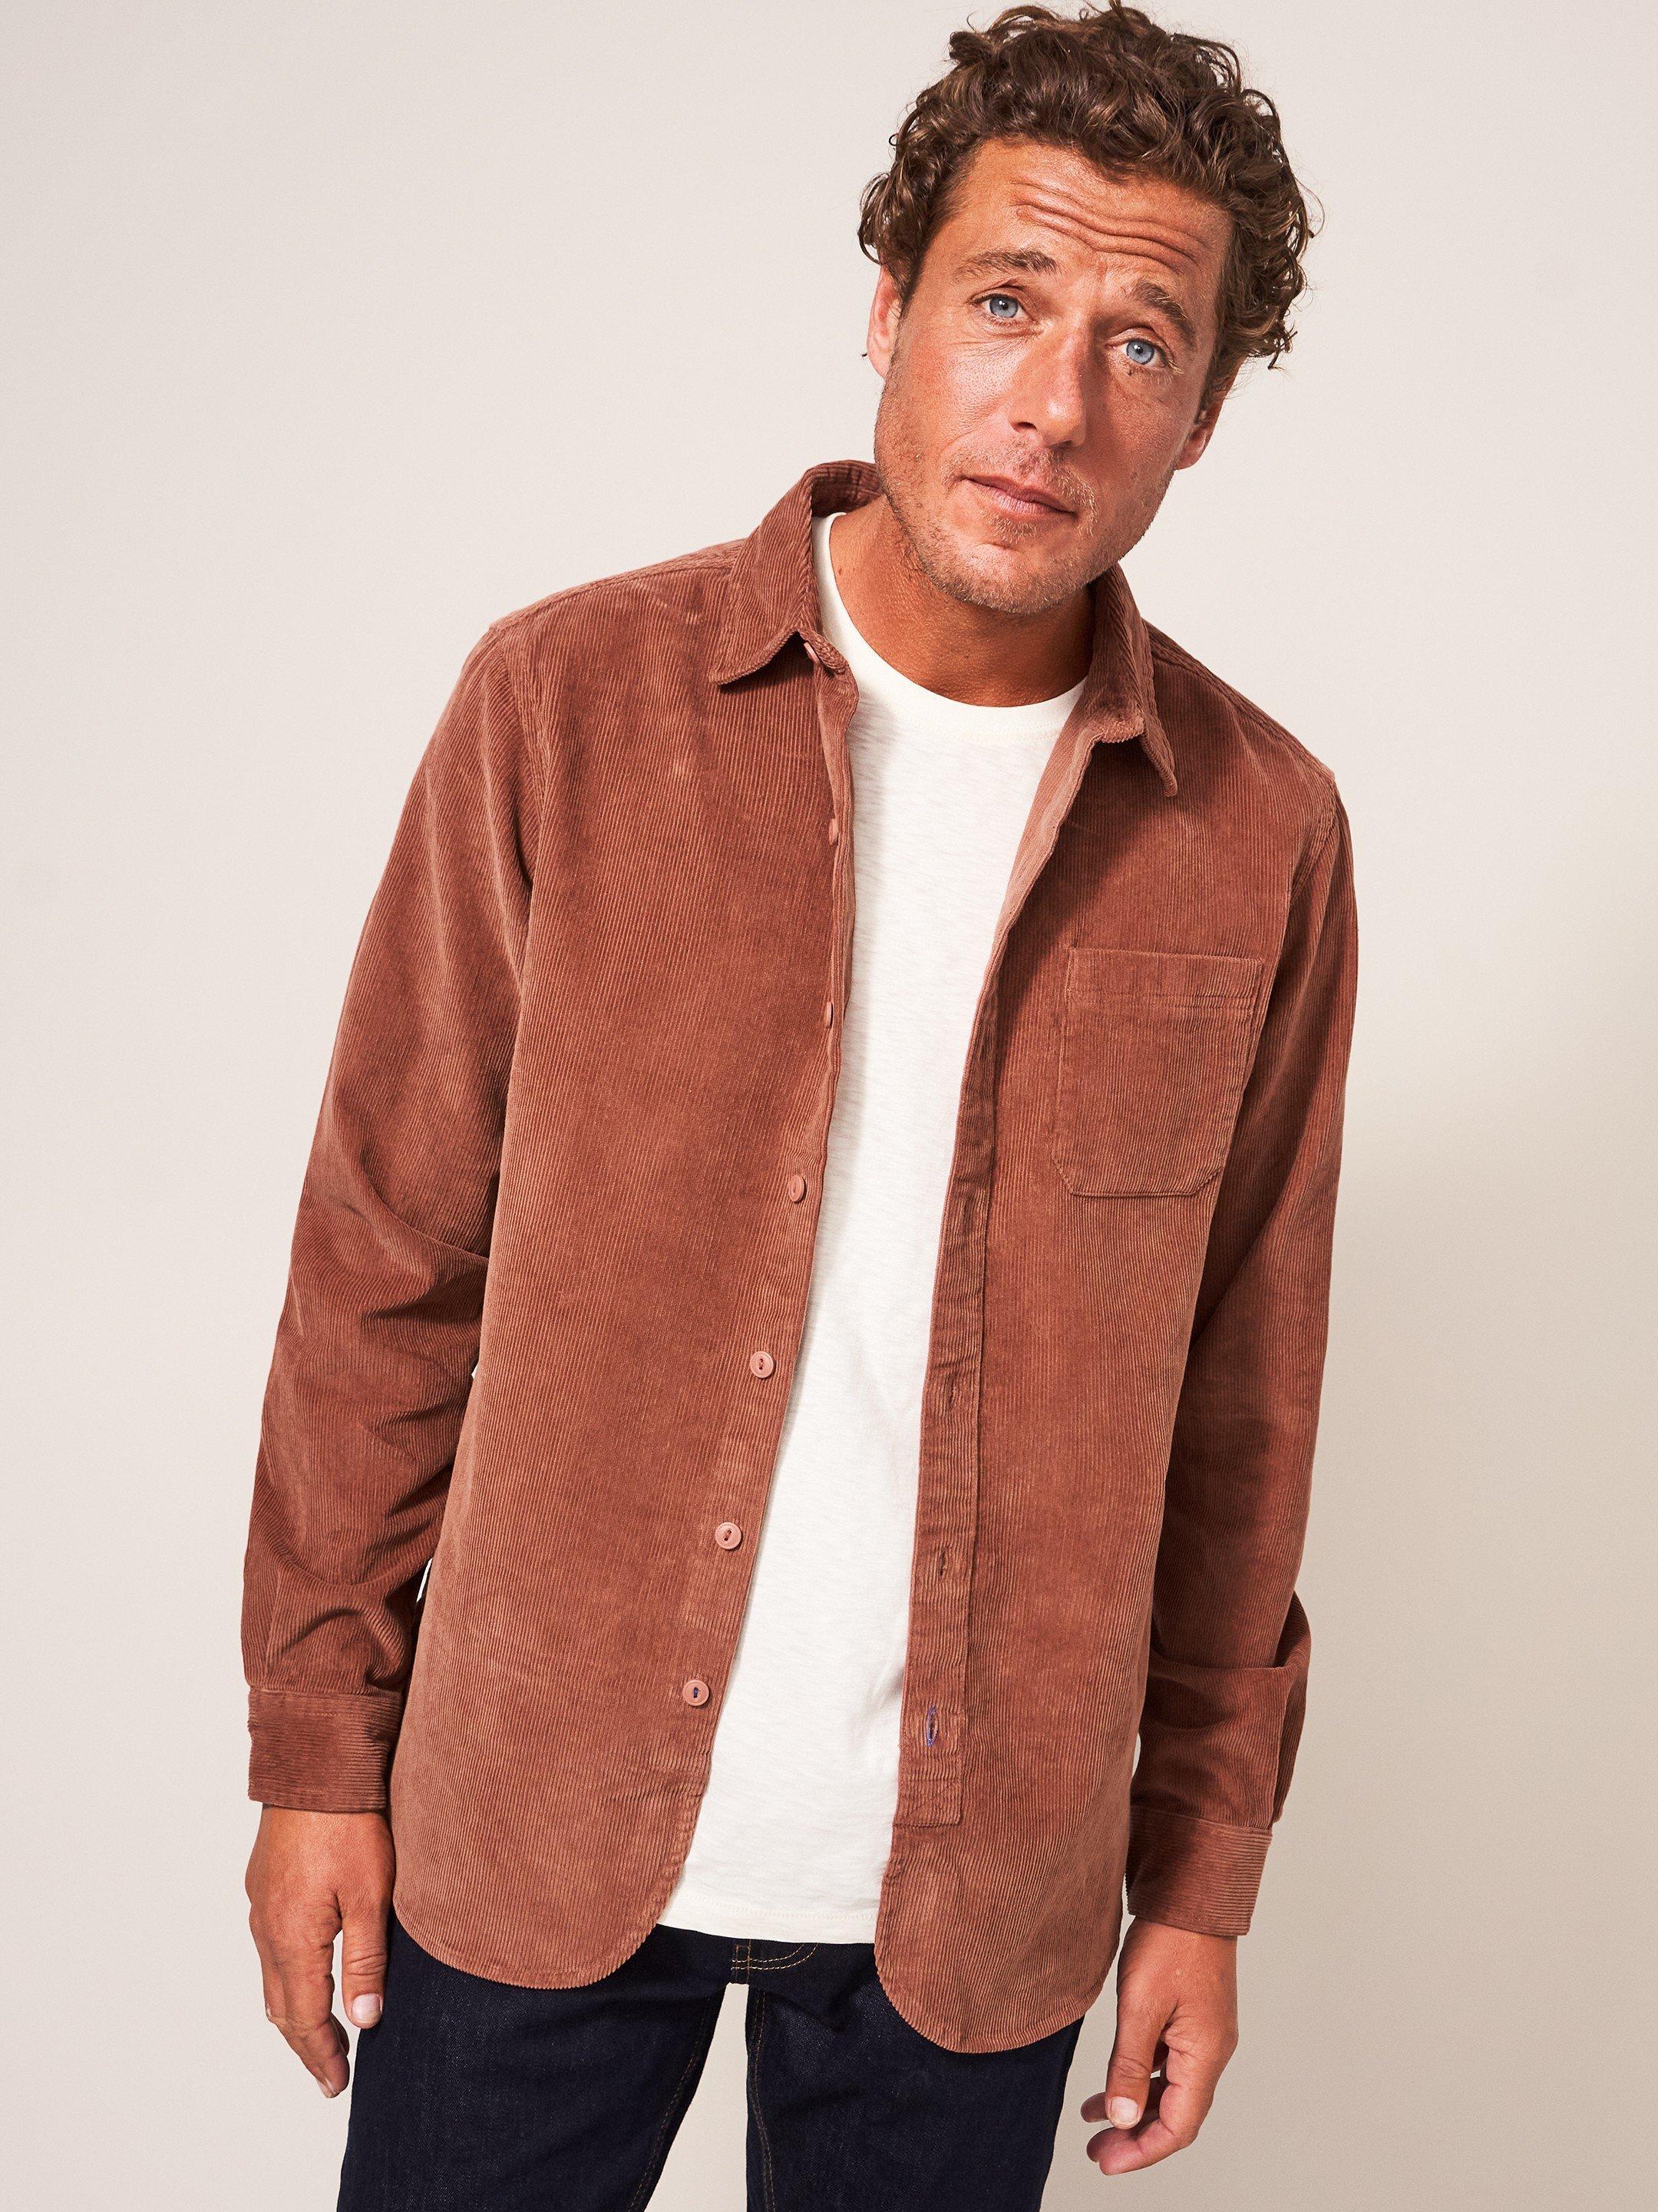 Whitwick Cord Shirt in DEEP BROWN - LIFESTYLE